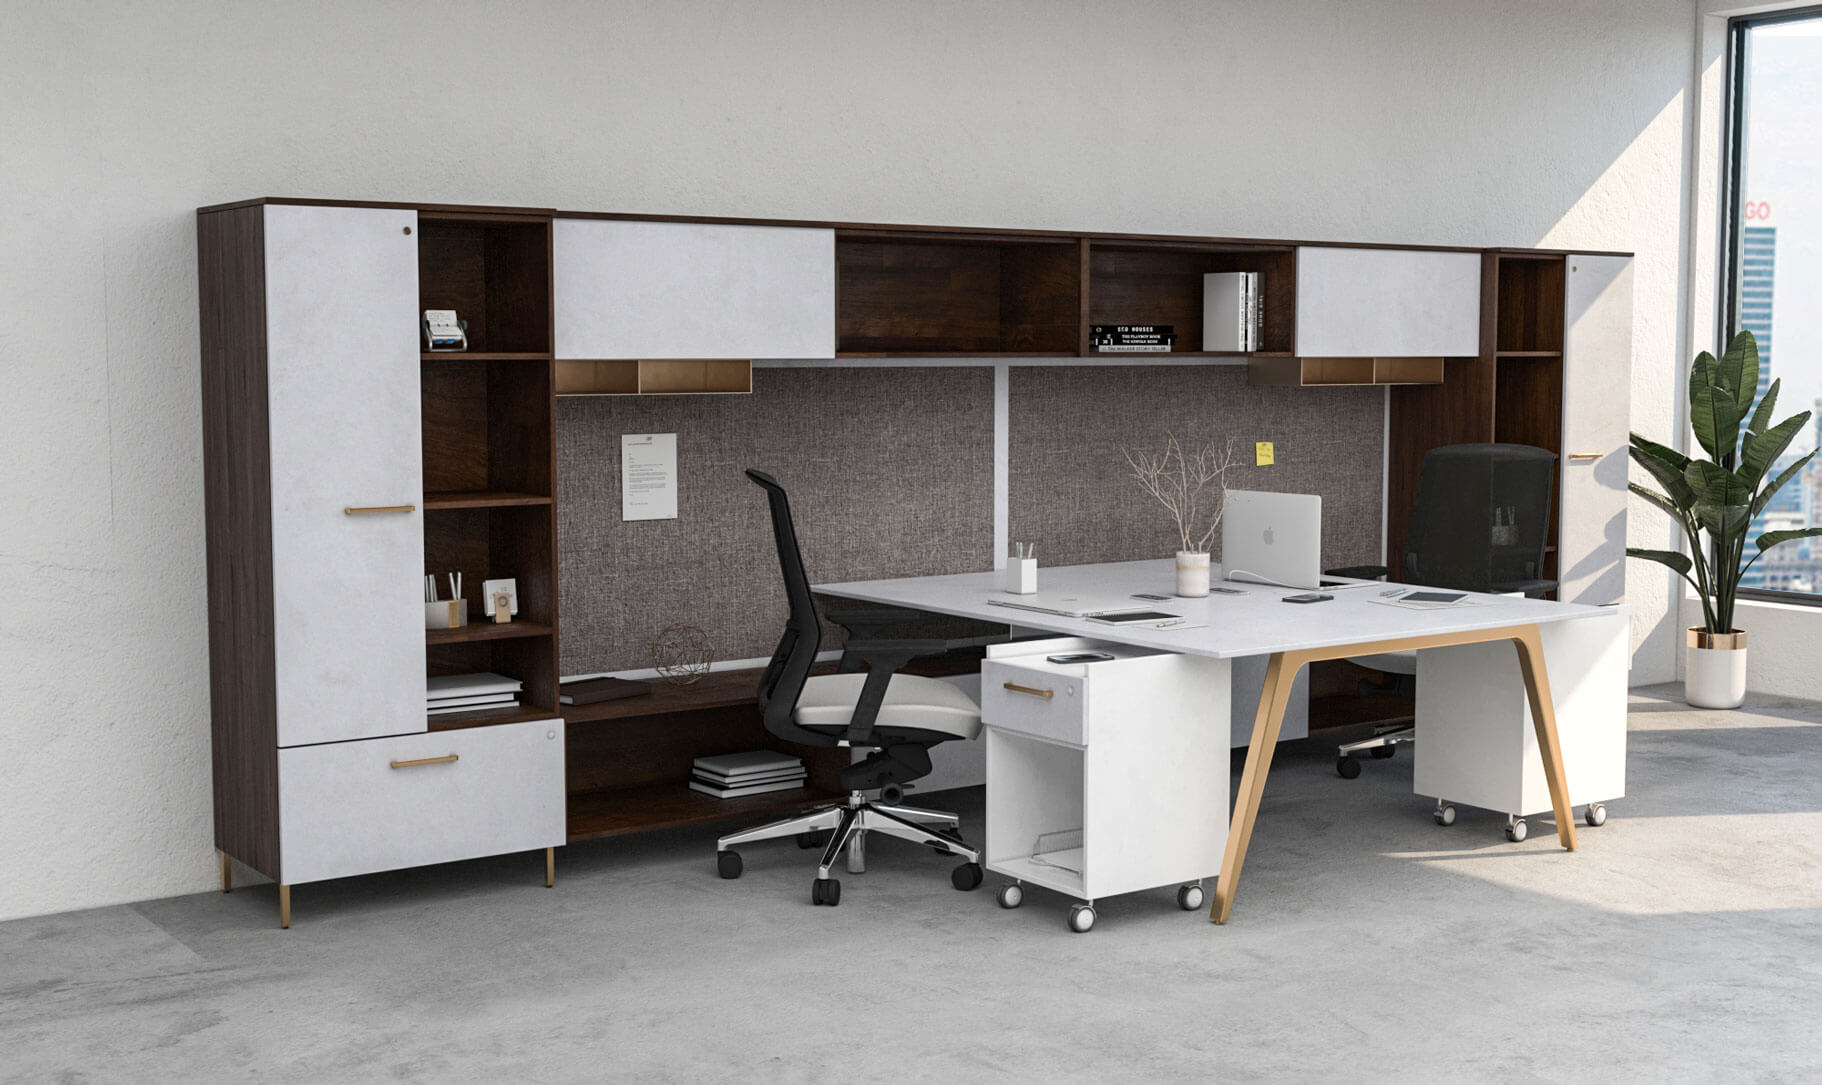 Office furniture supply and installation | The Benefits of Professional Office Furniture Space Planning